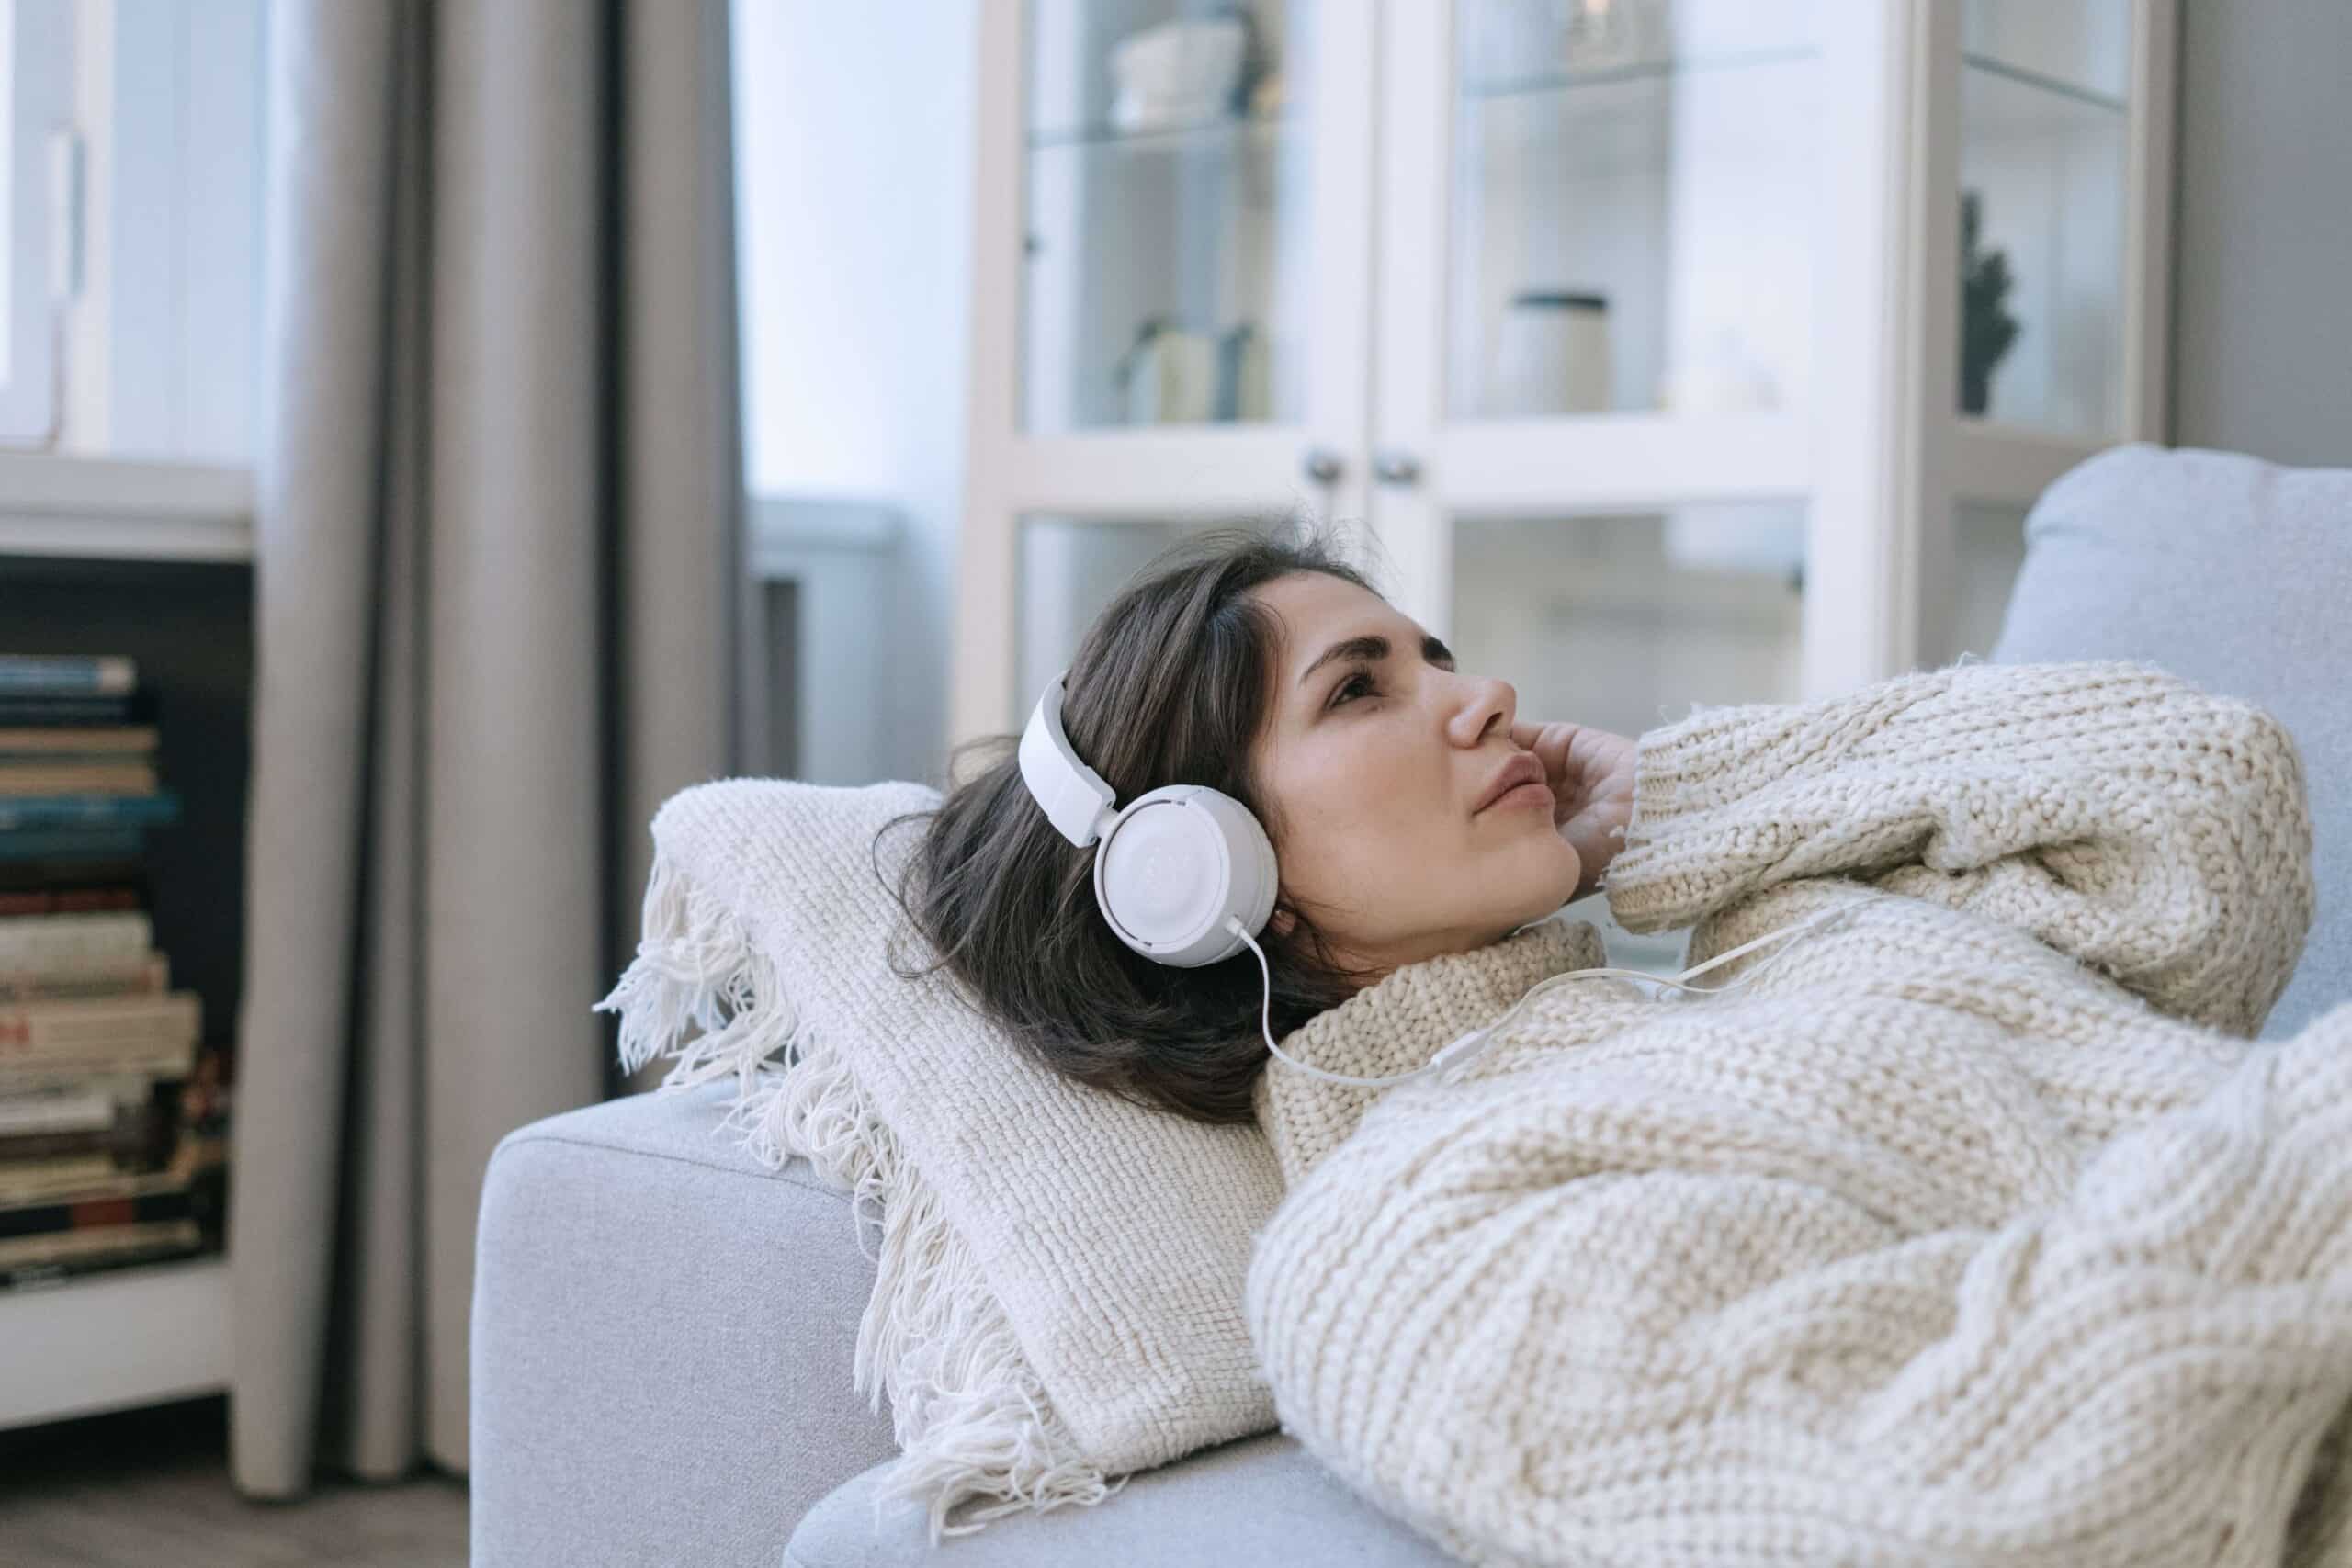 A woman lying down on a sofa, wearing headphones, listening to music.